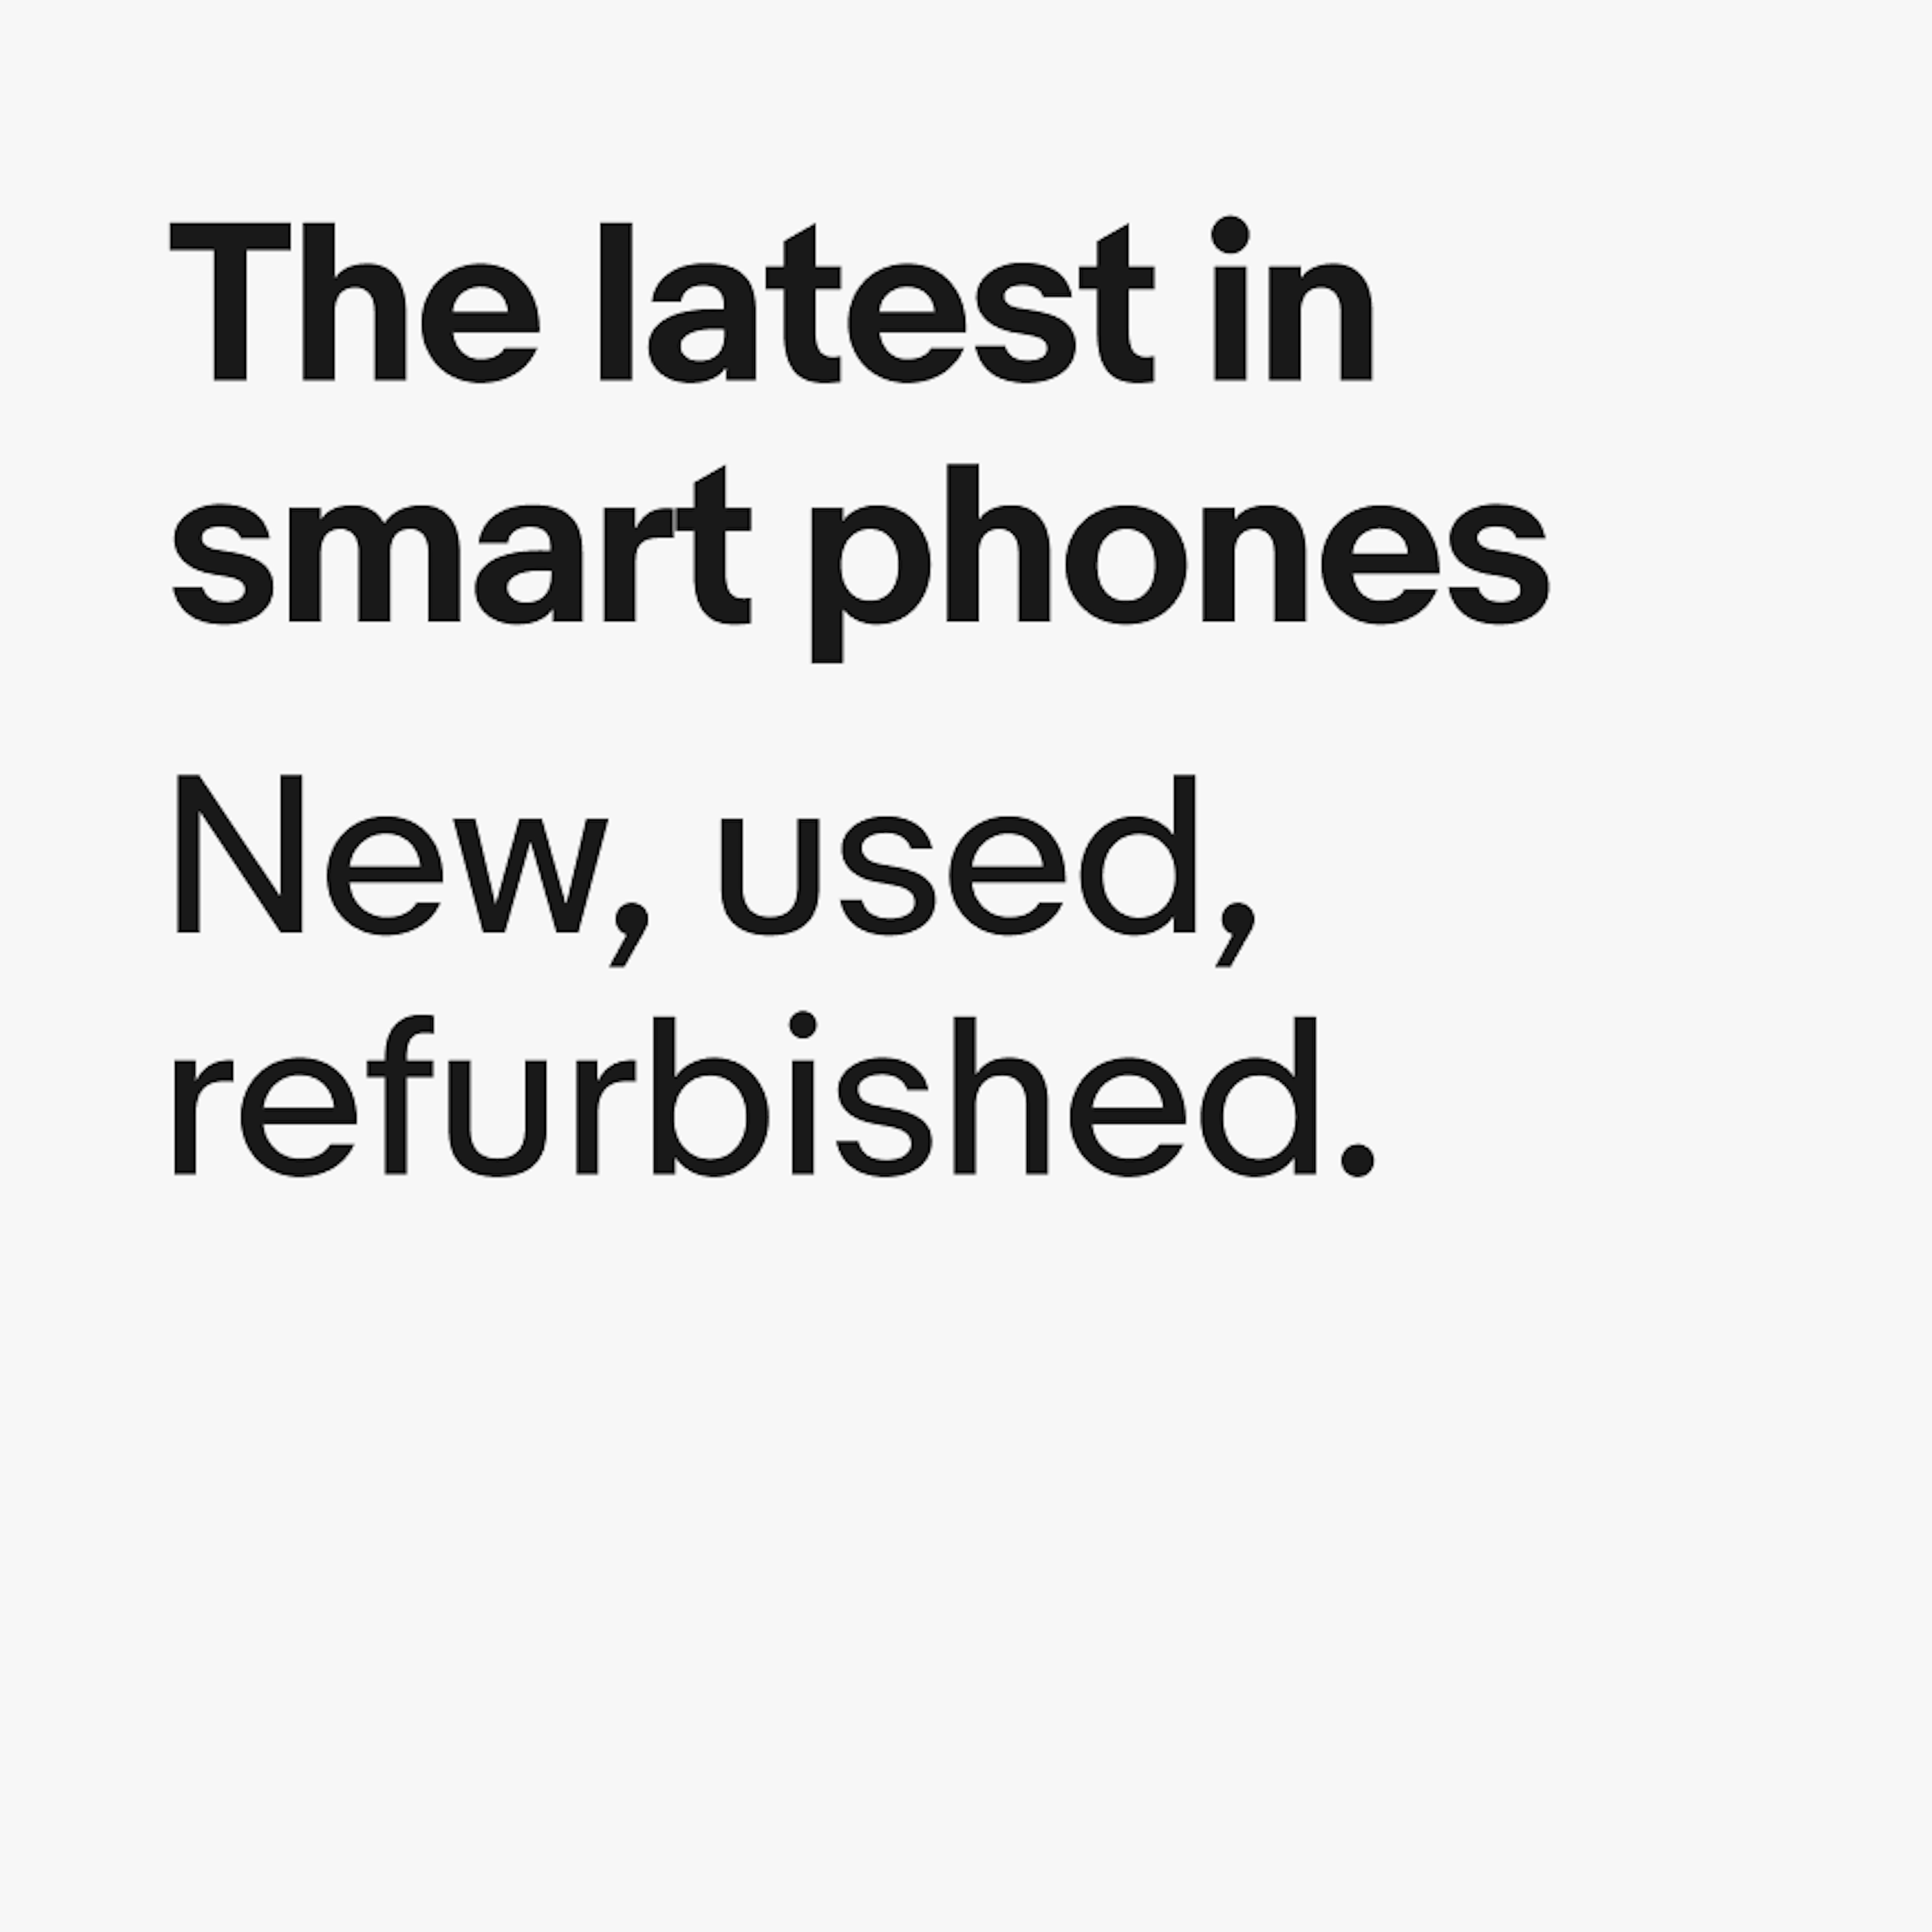 A type-based ad for smart phones. The headline is in bold weight, while the subtitle is in regular weight and is the same size as the headline.